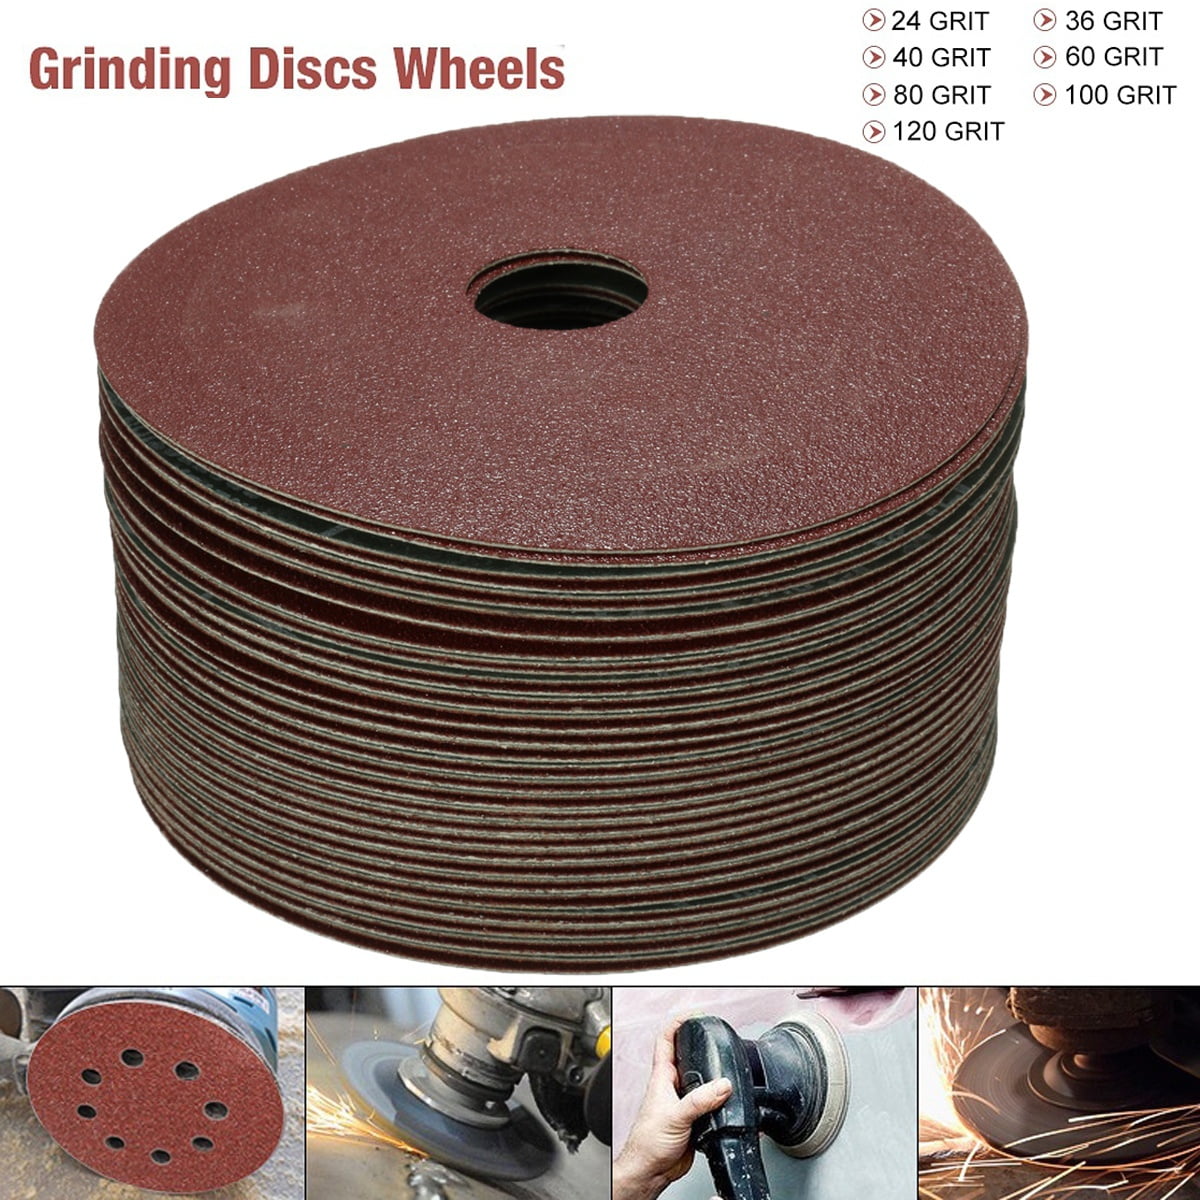 Sandpaper 5m x 115mm Sanding Roll 120 Grit Anti Clogging for Flat Surfaces 